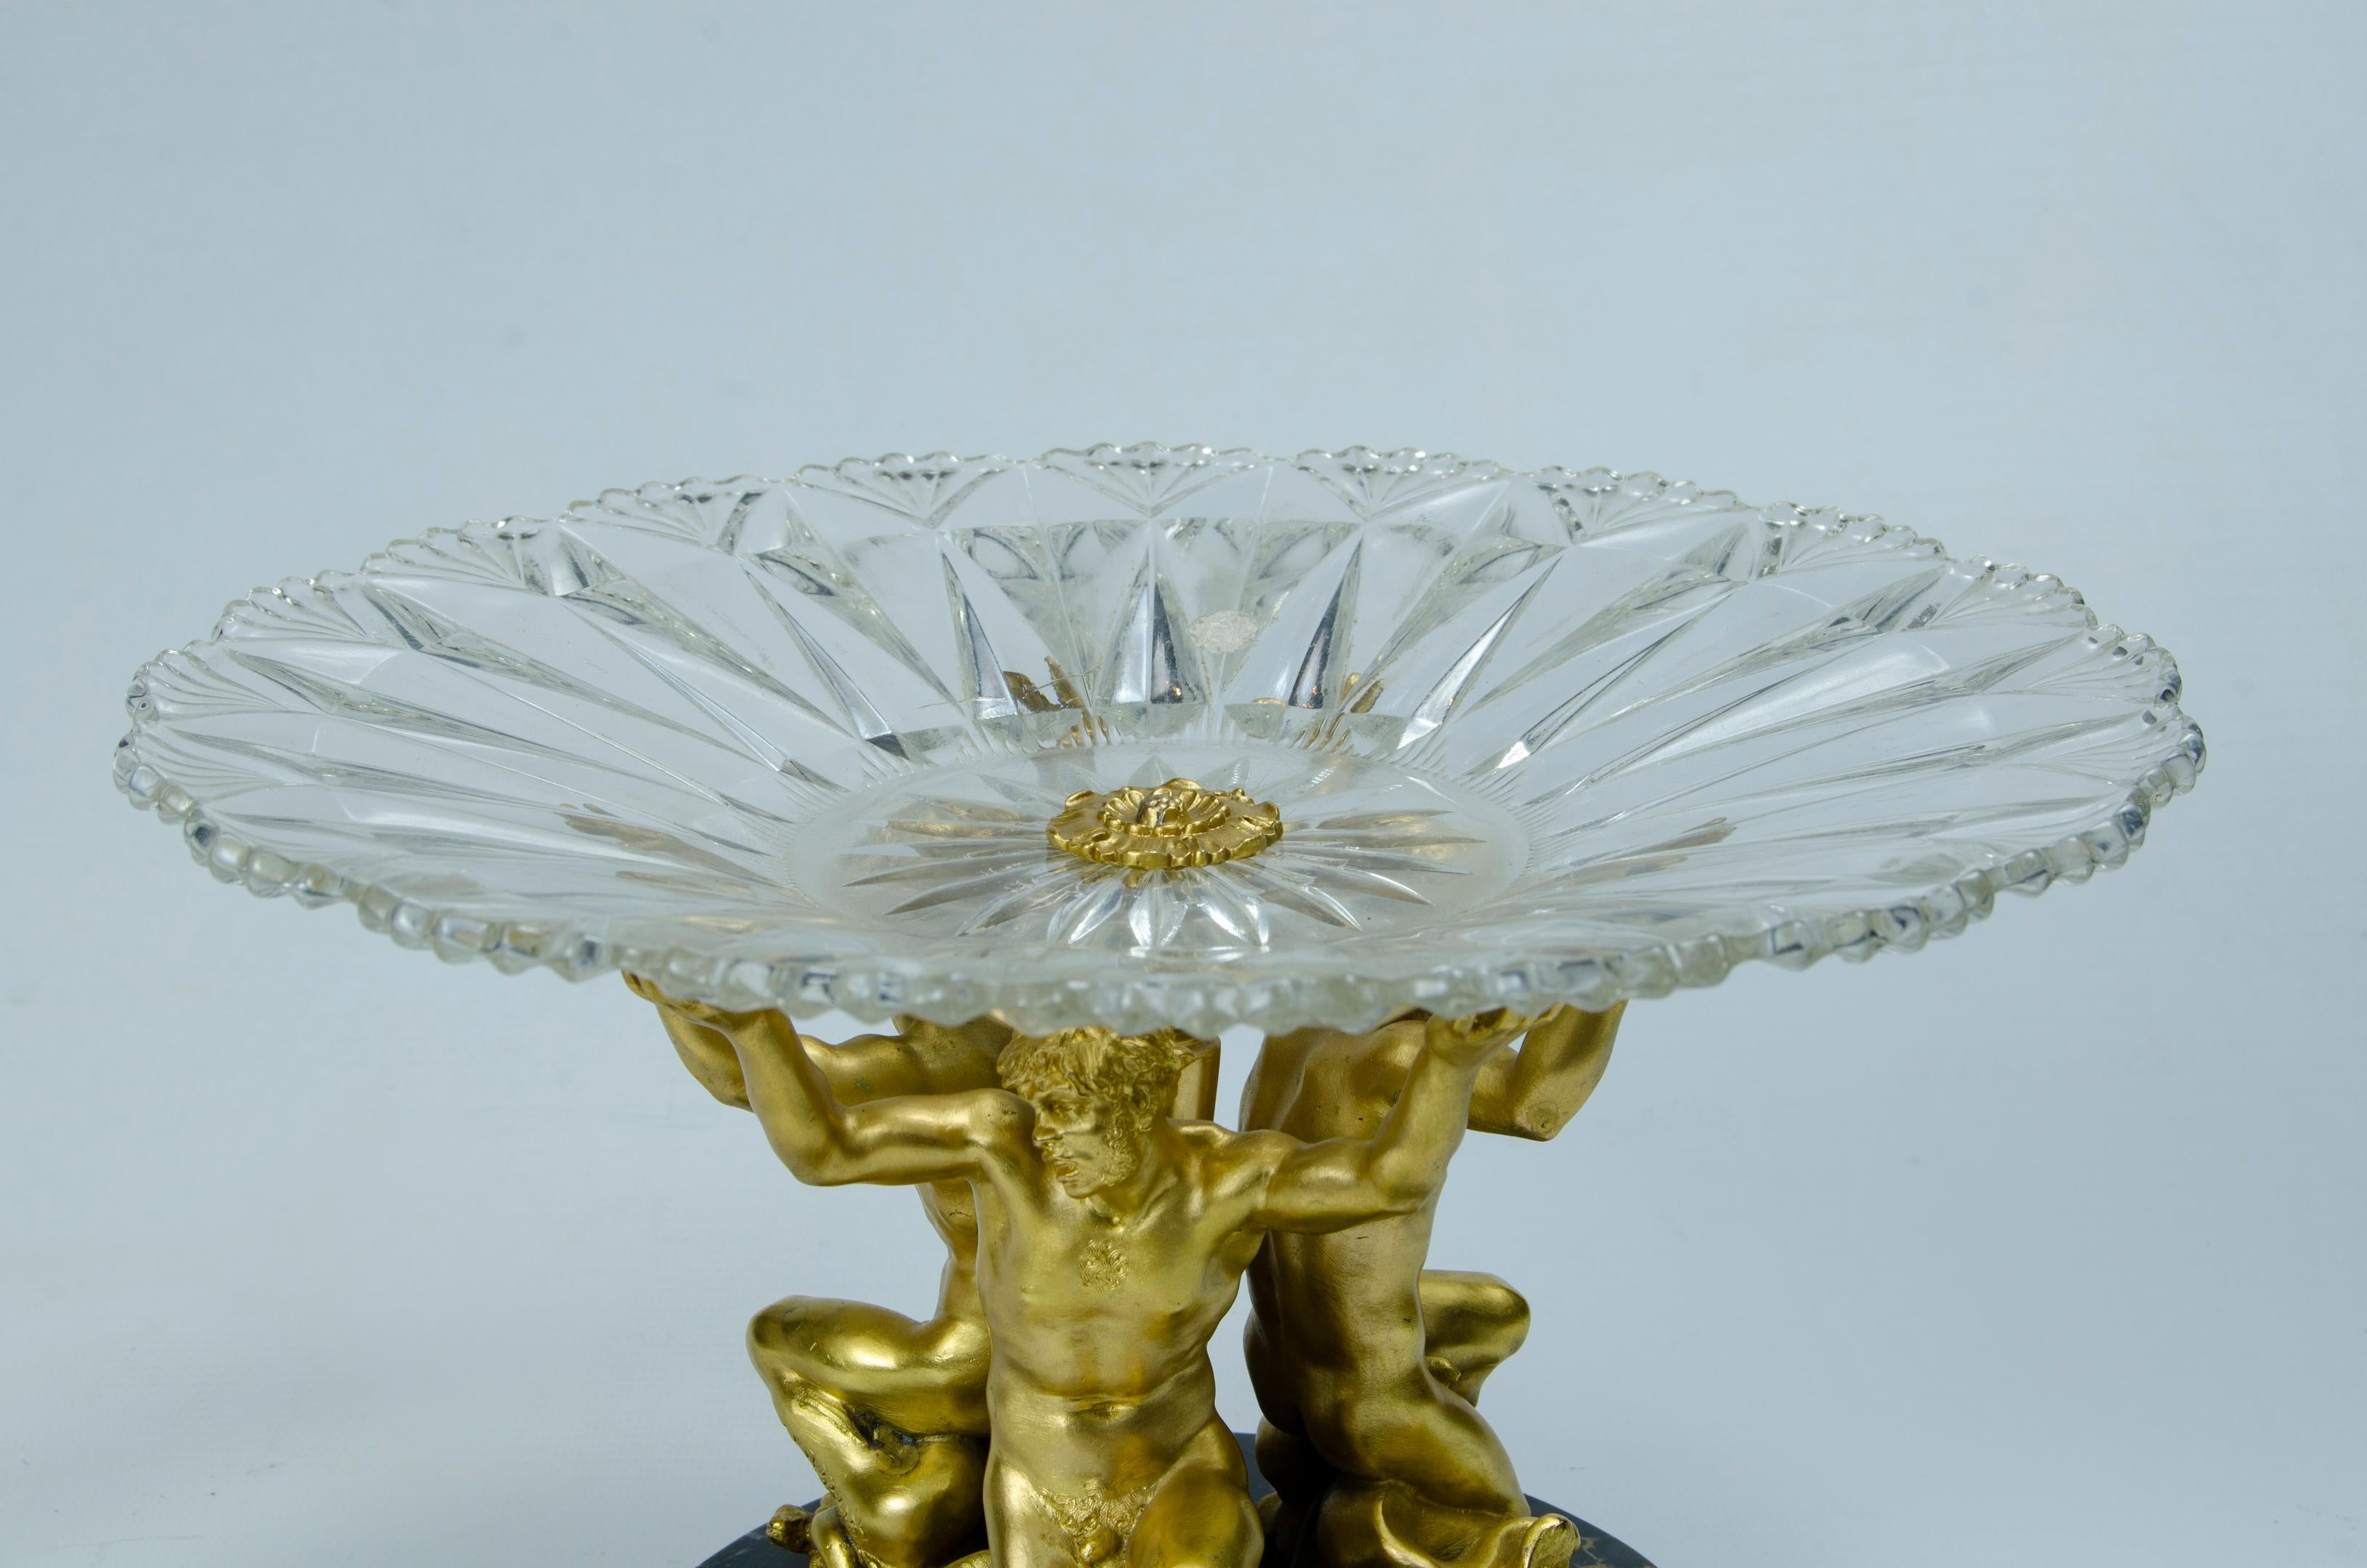 Centerpiece (Atlantes) bronze, marble and glass
materials: portore marble, gilt bronze and glass
Origin Italy circa 1930
neoclassical perfect condition.